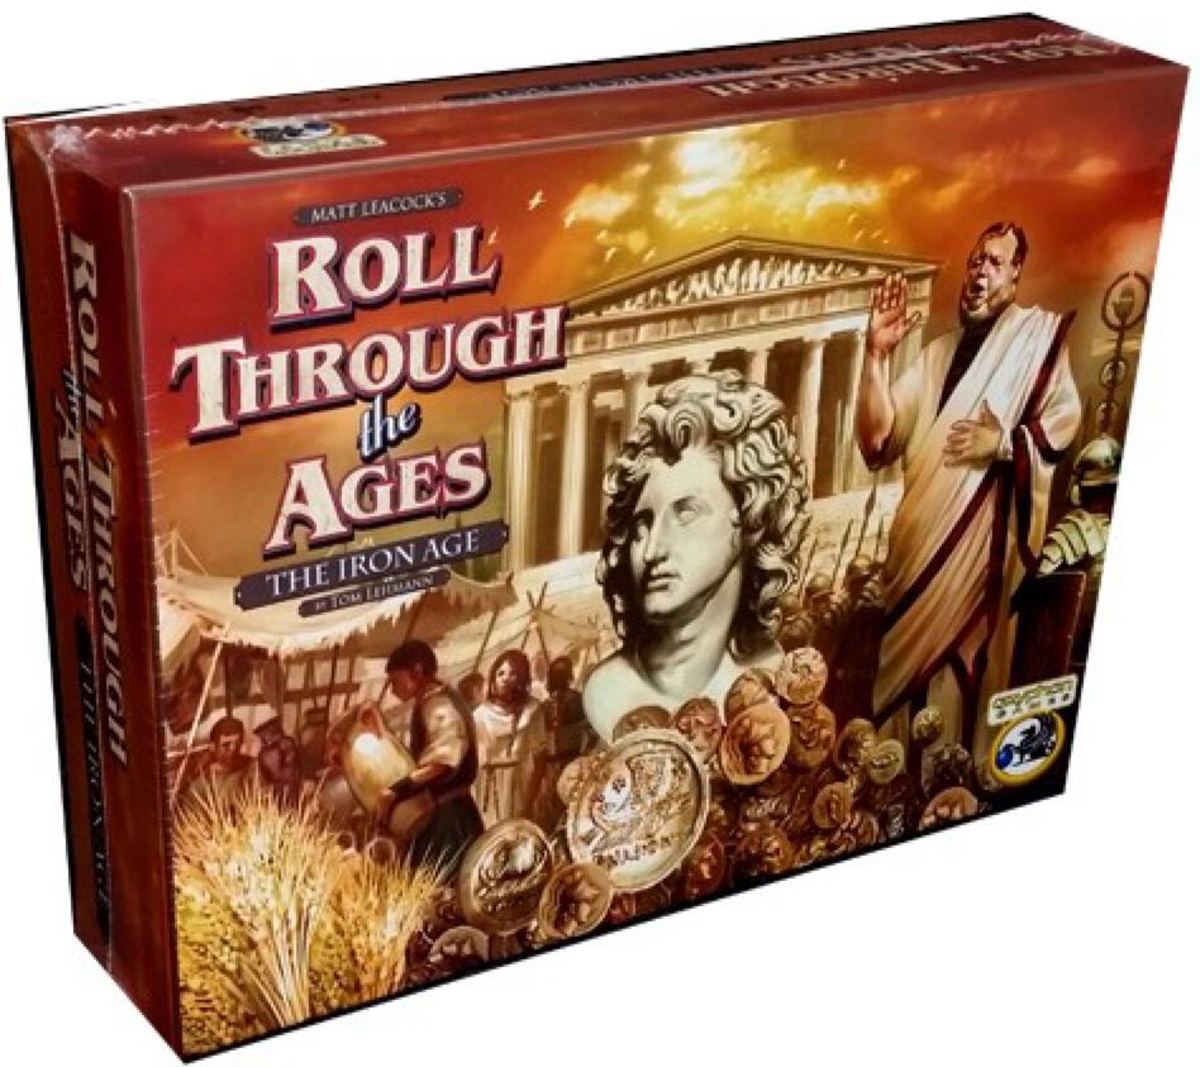 Roll Through the Ages - The Iron Age